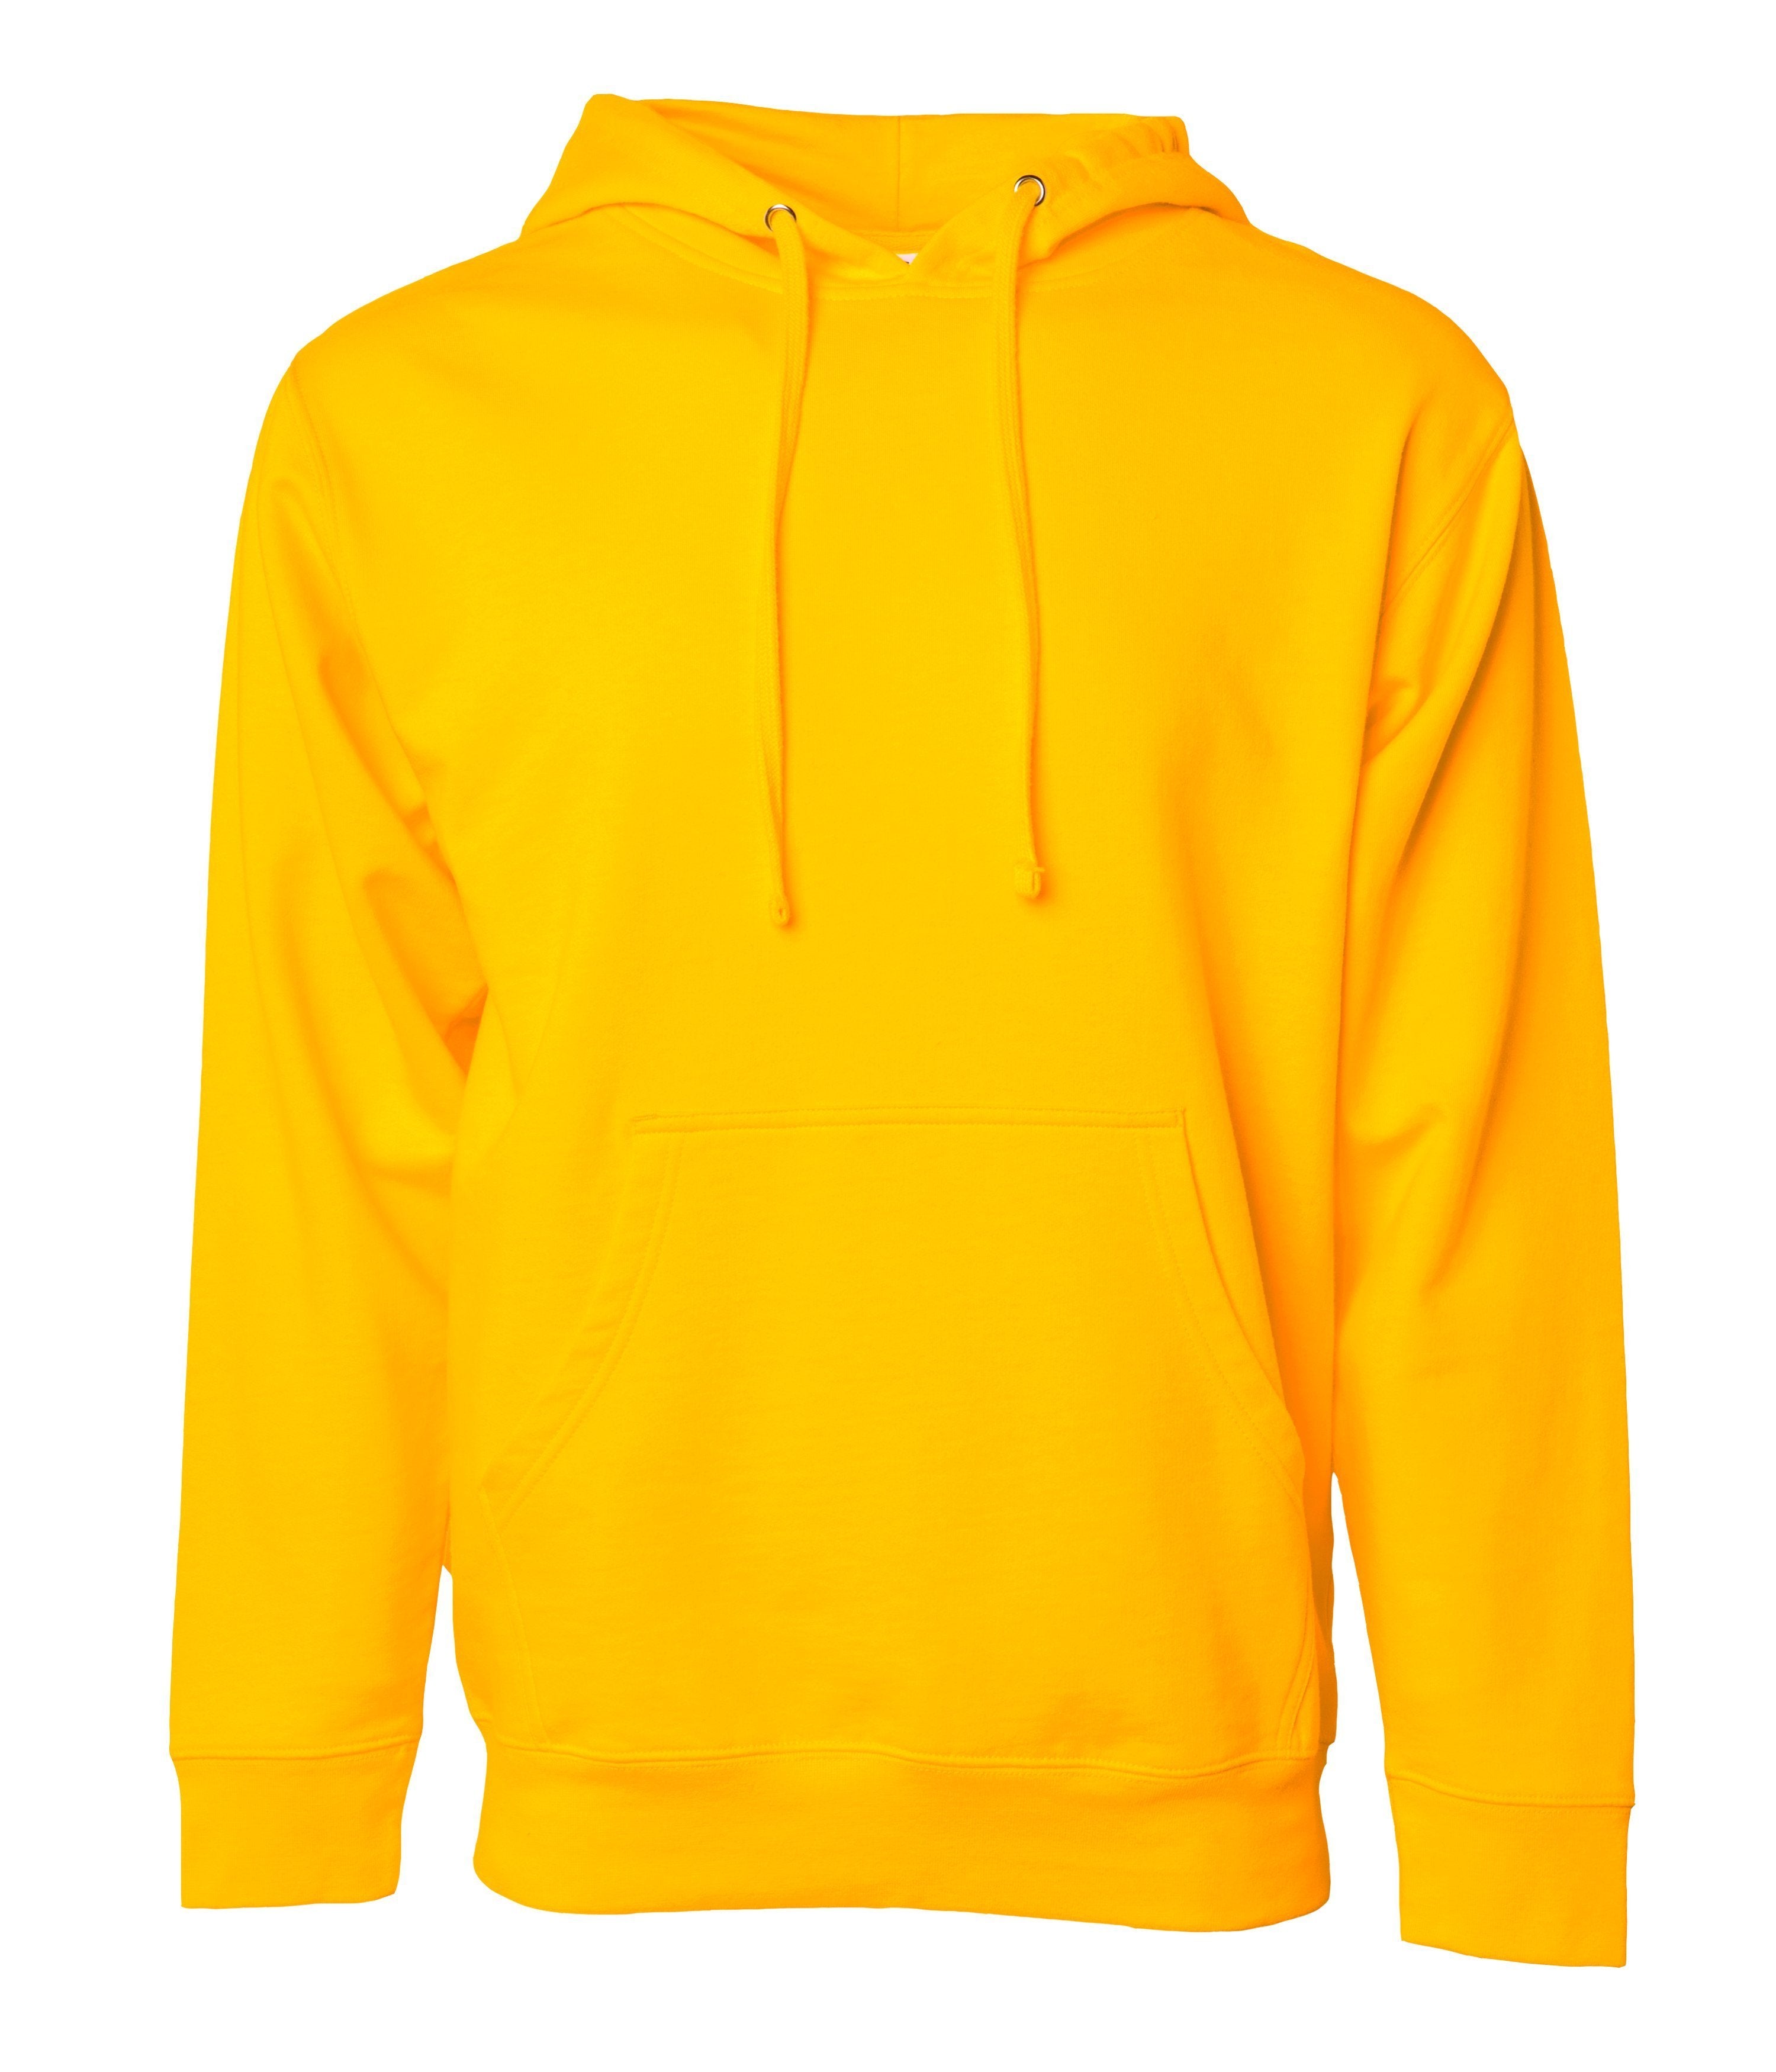 SS4500 - Midweight Hooded Pullover Sweatshirt in Gold